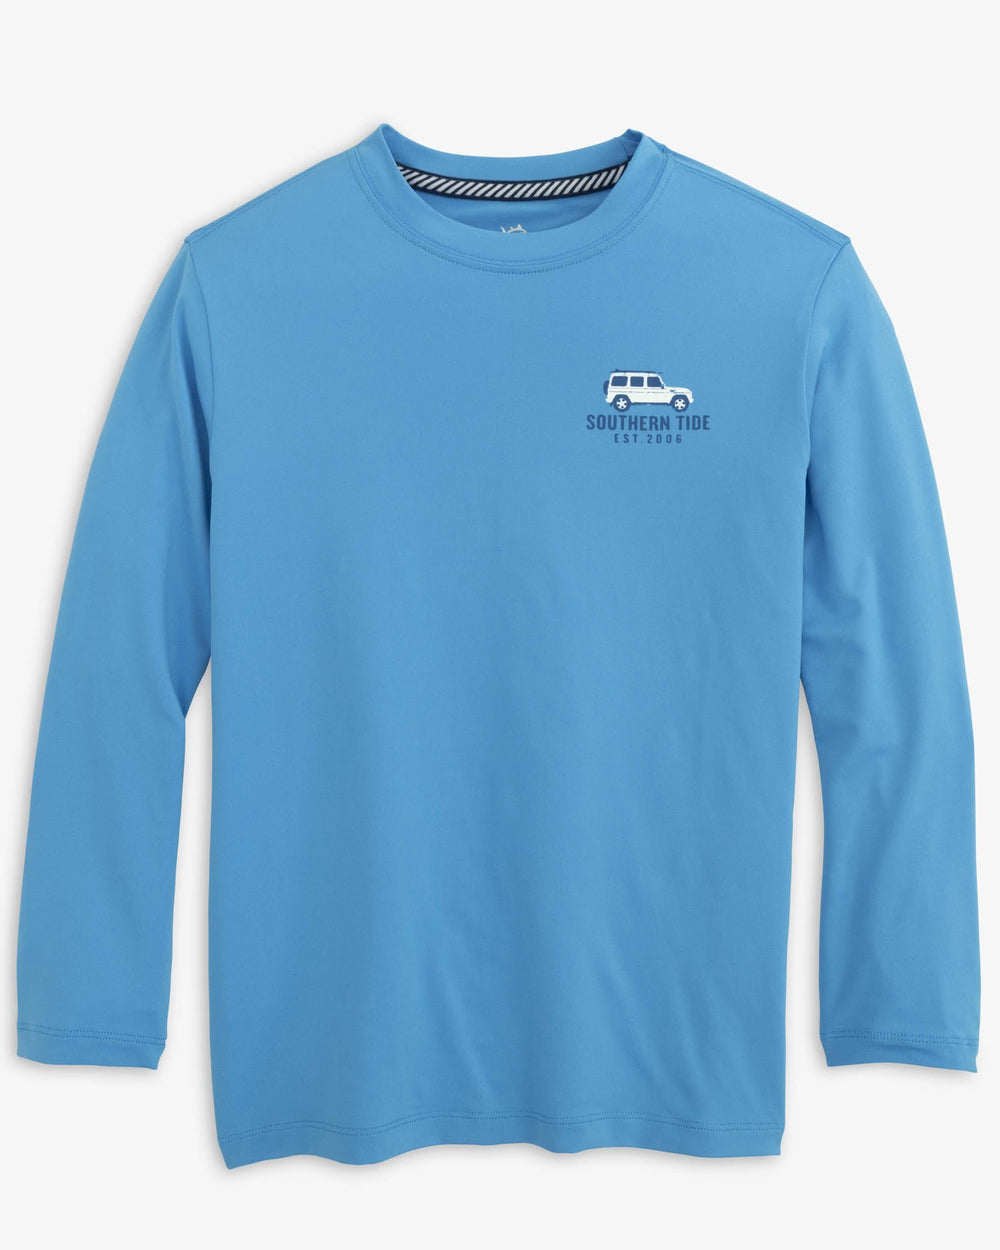 The front view of the Southern Tide Youth Classic Cruising Long Sleeve Performance T-Shirt by Southern Tide - Boat Blue